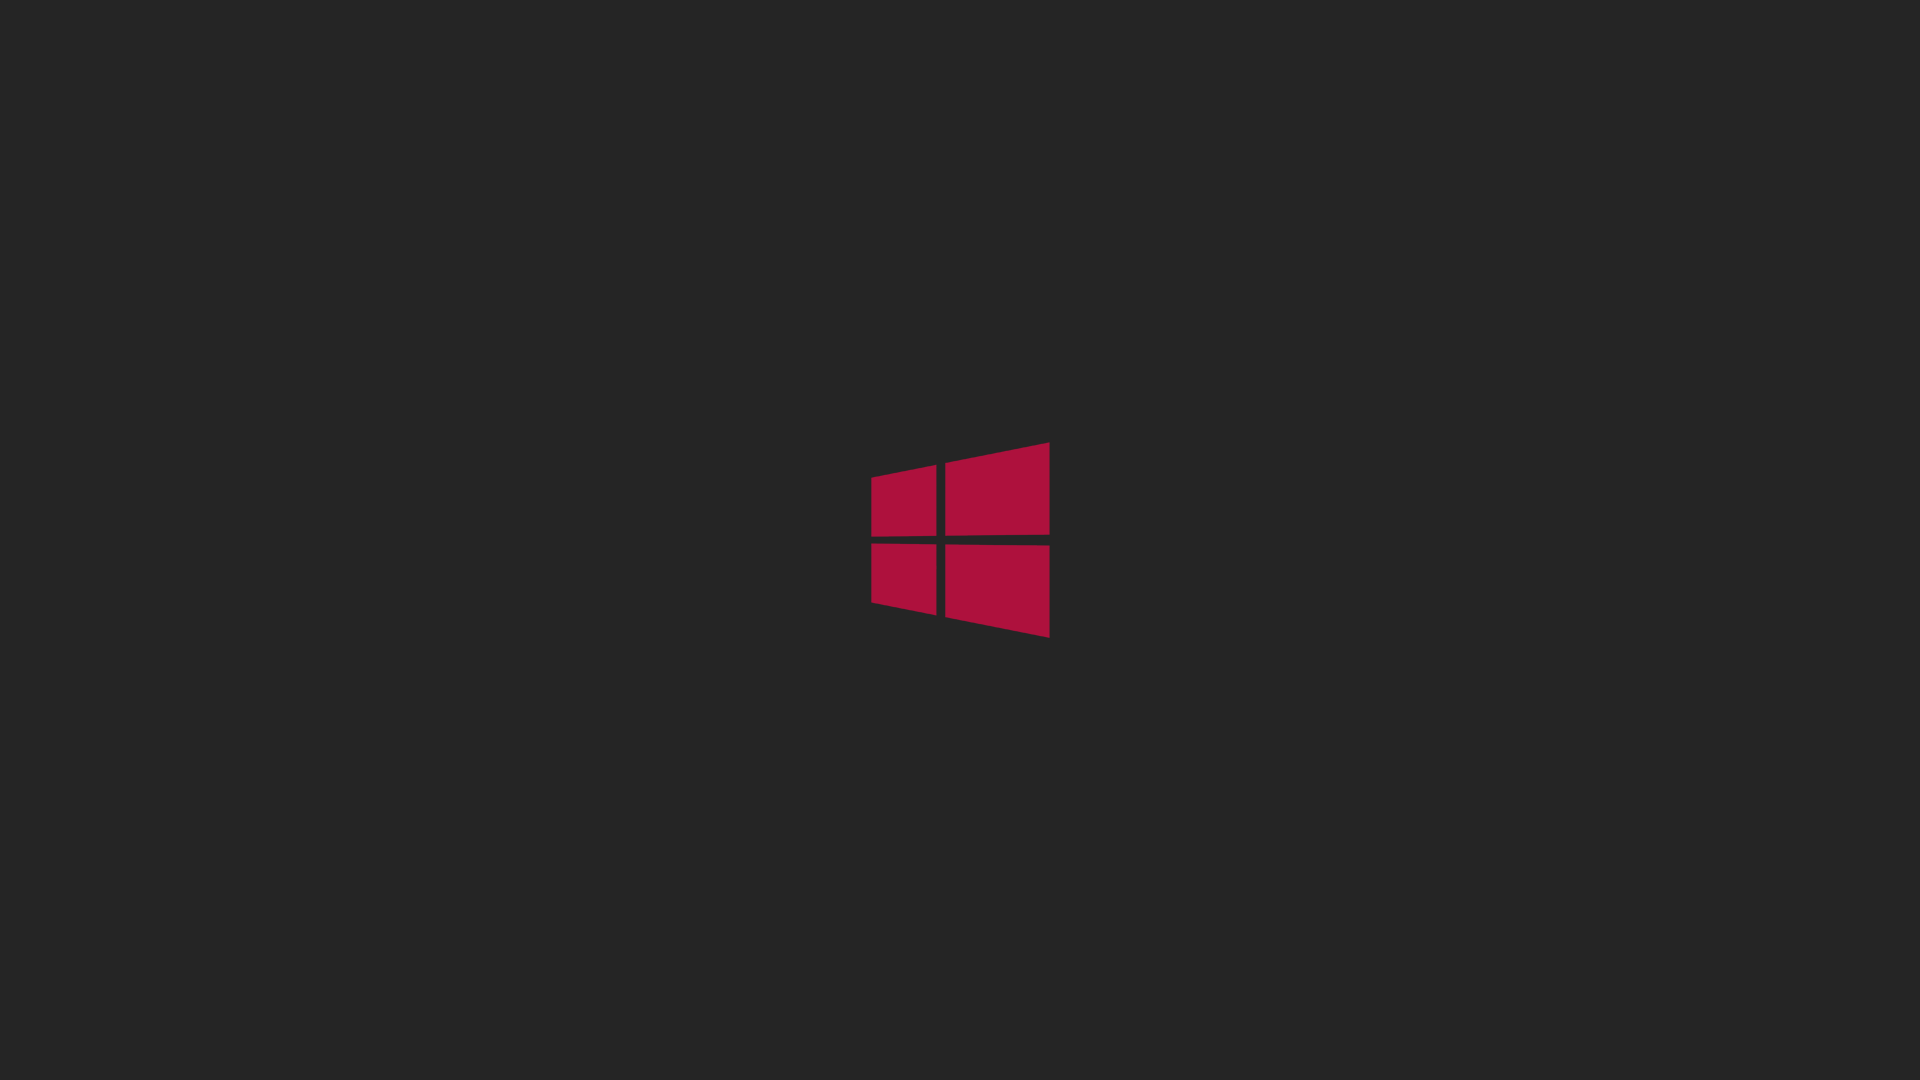 All Black and Red Logo - Windows 8 Logo with Red Logo and Black Background | HD Wallpapers